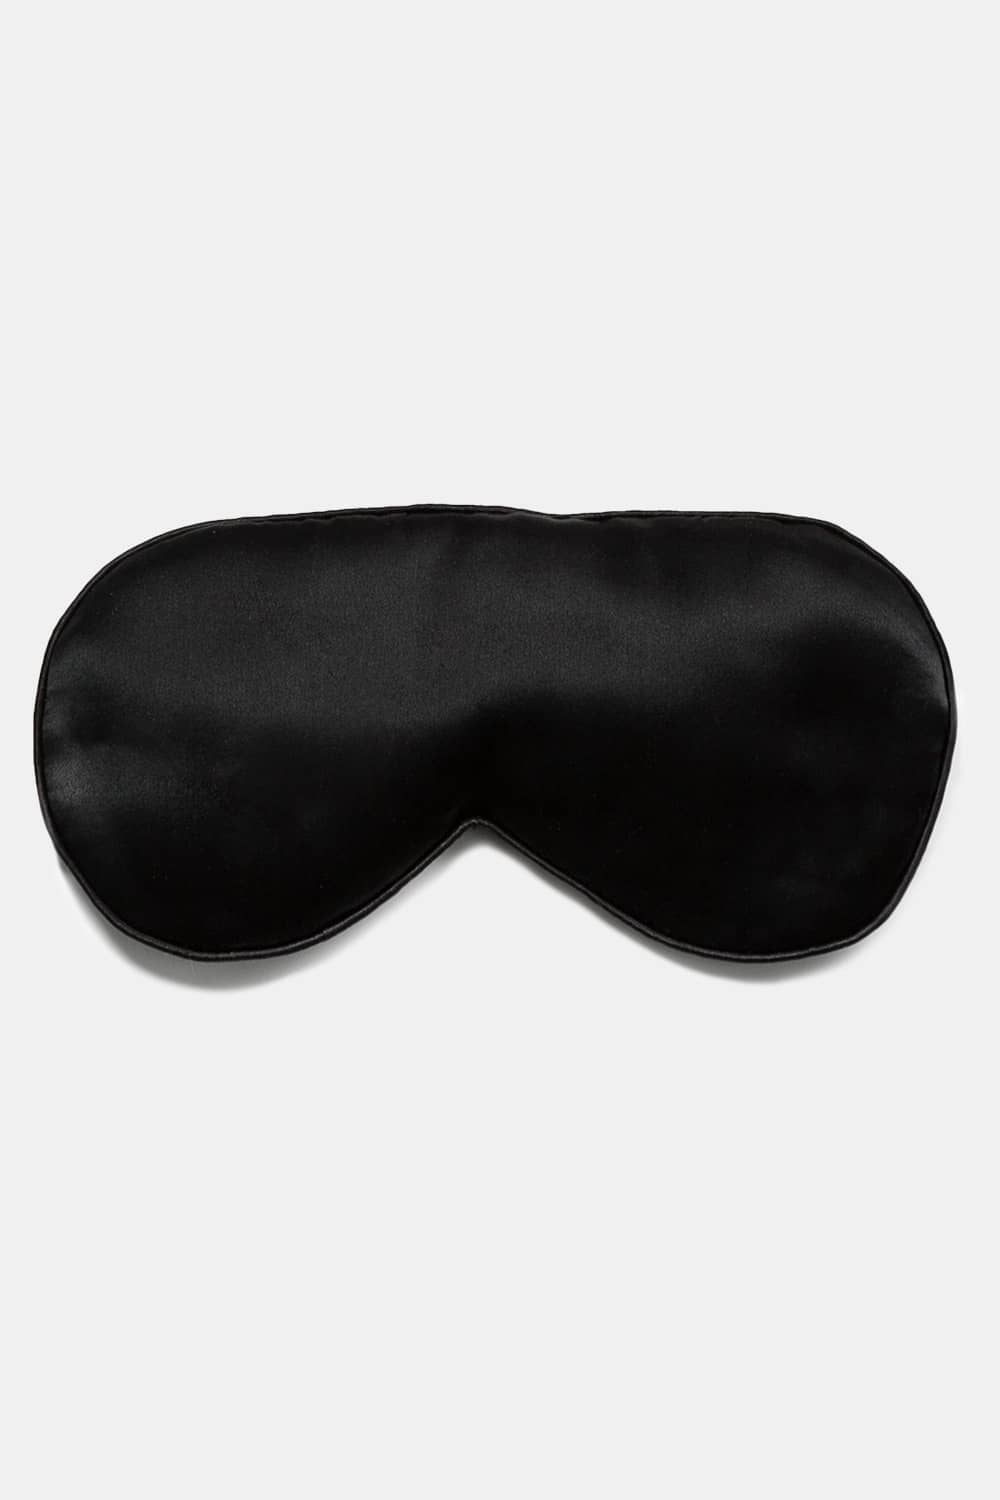 100% Mulberry Silk Therapeutic Sleep Mask - 25 Momme Beauty>Masks Fishers Finery Black Adjustable 